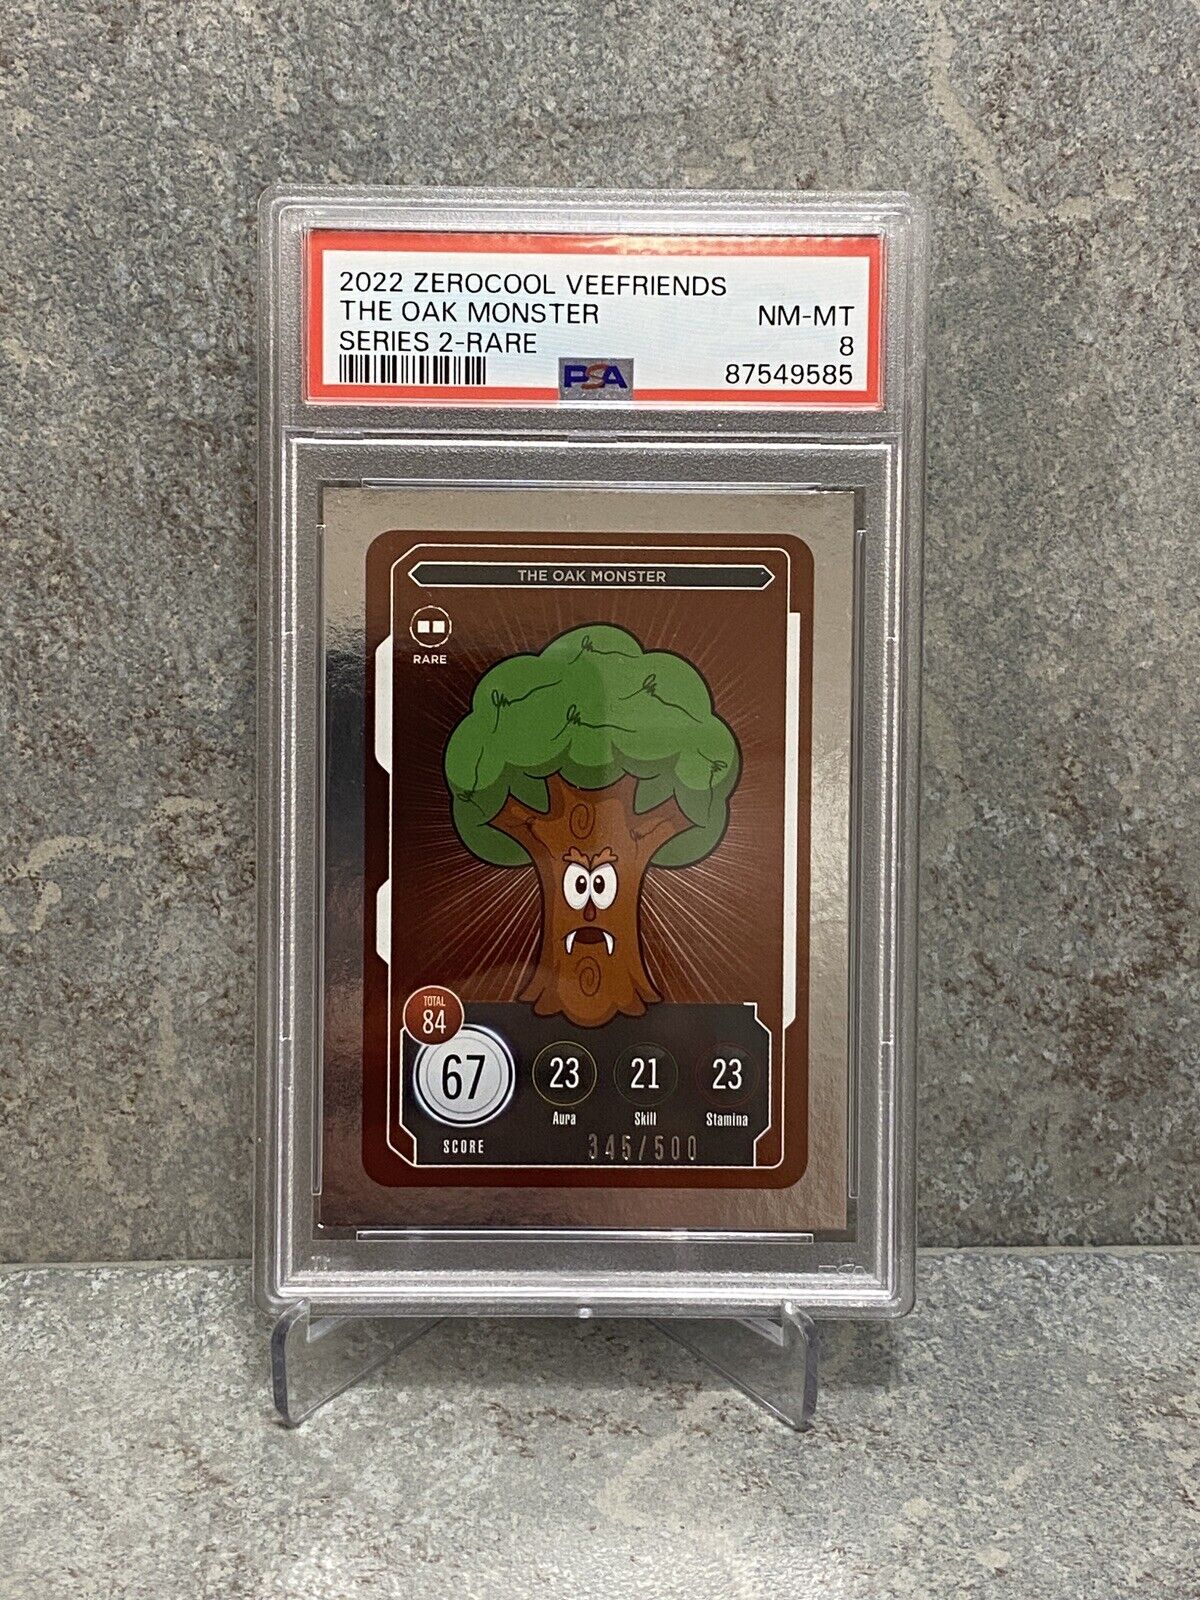 PSA 8 The Oak Monster RARE /500 Compete and Collect Veefriends Series 2 Pop 2 SP